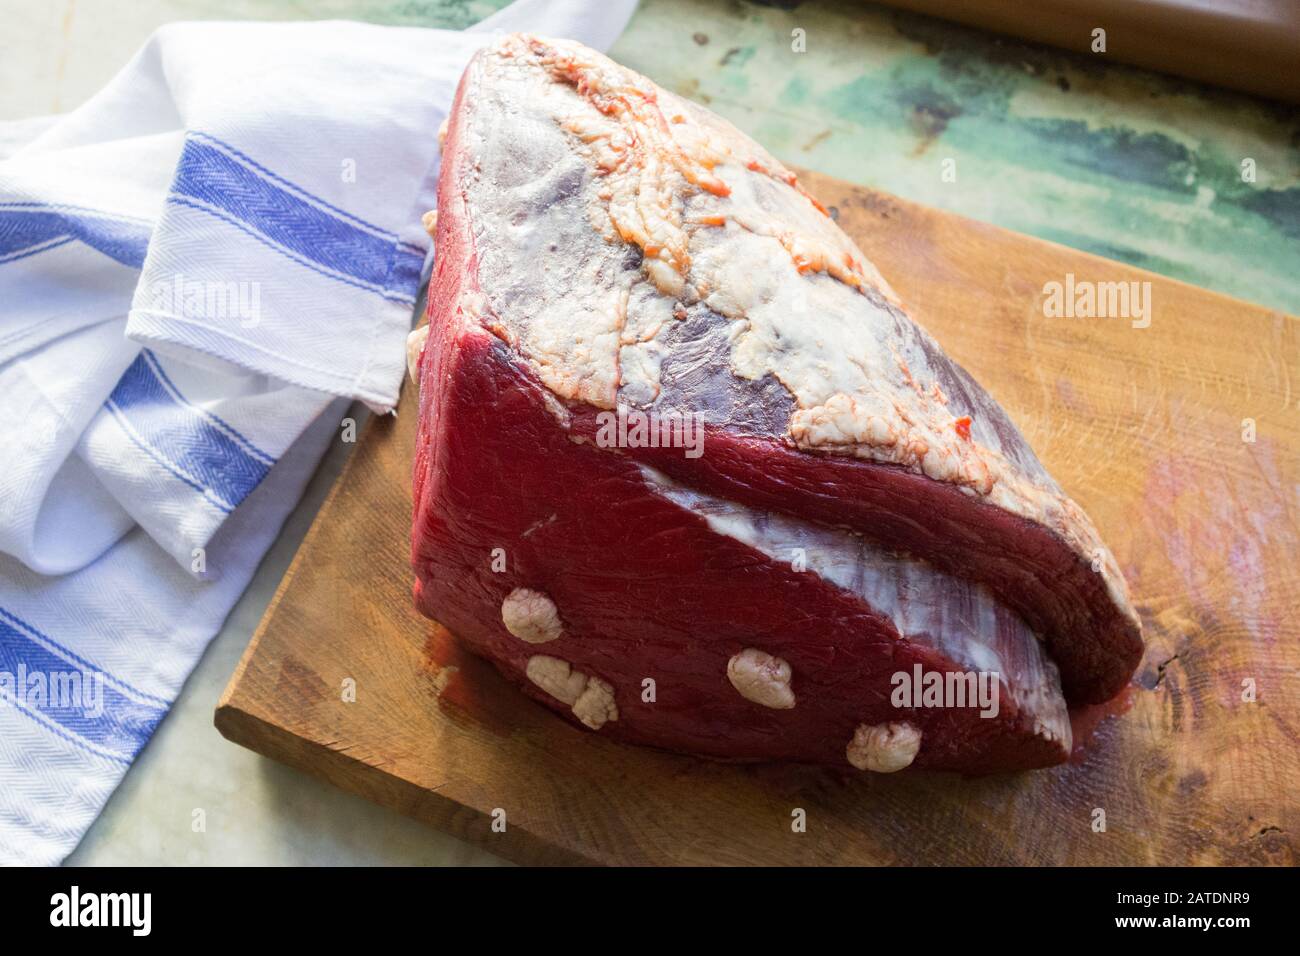 A joint of red meat on a chopping board Stock Photo